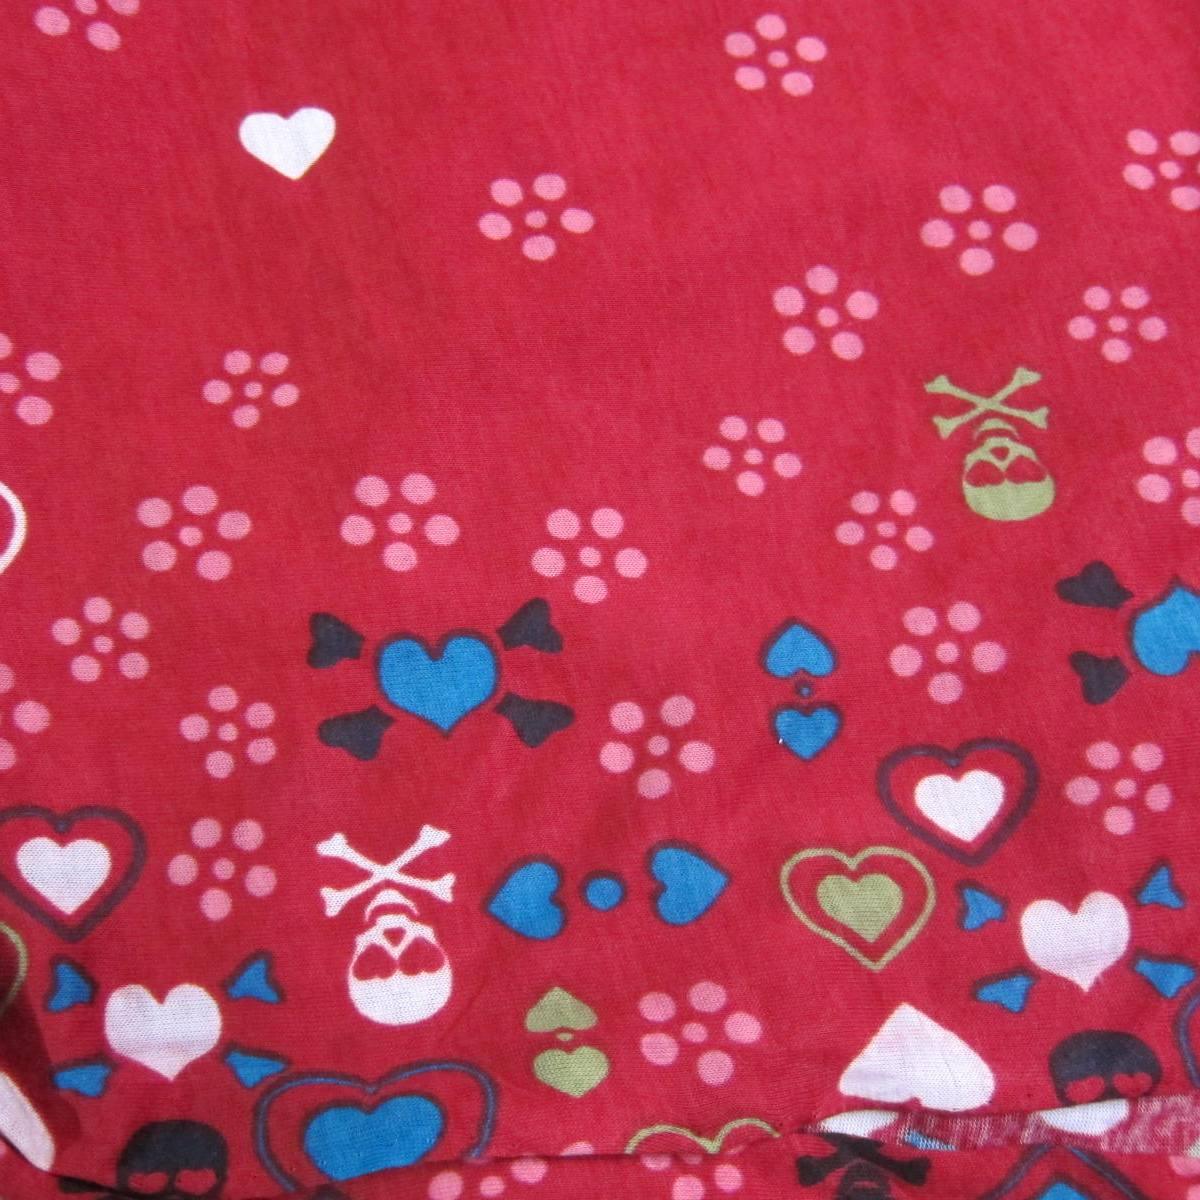 Hearts and Skulls Border Print on Red Cotton Jersey